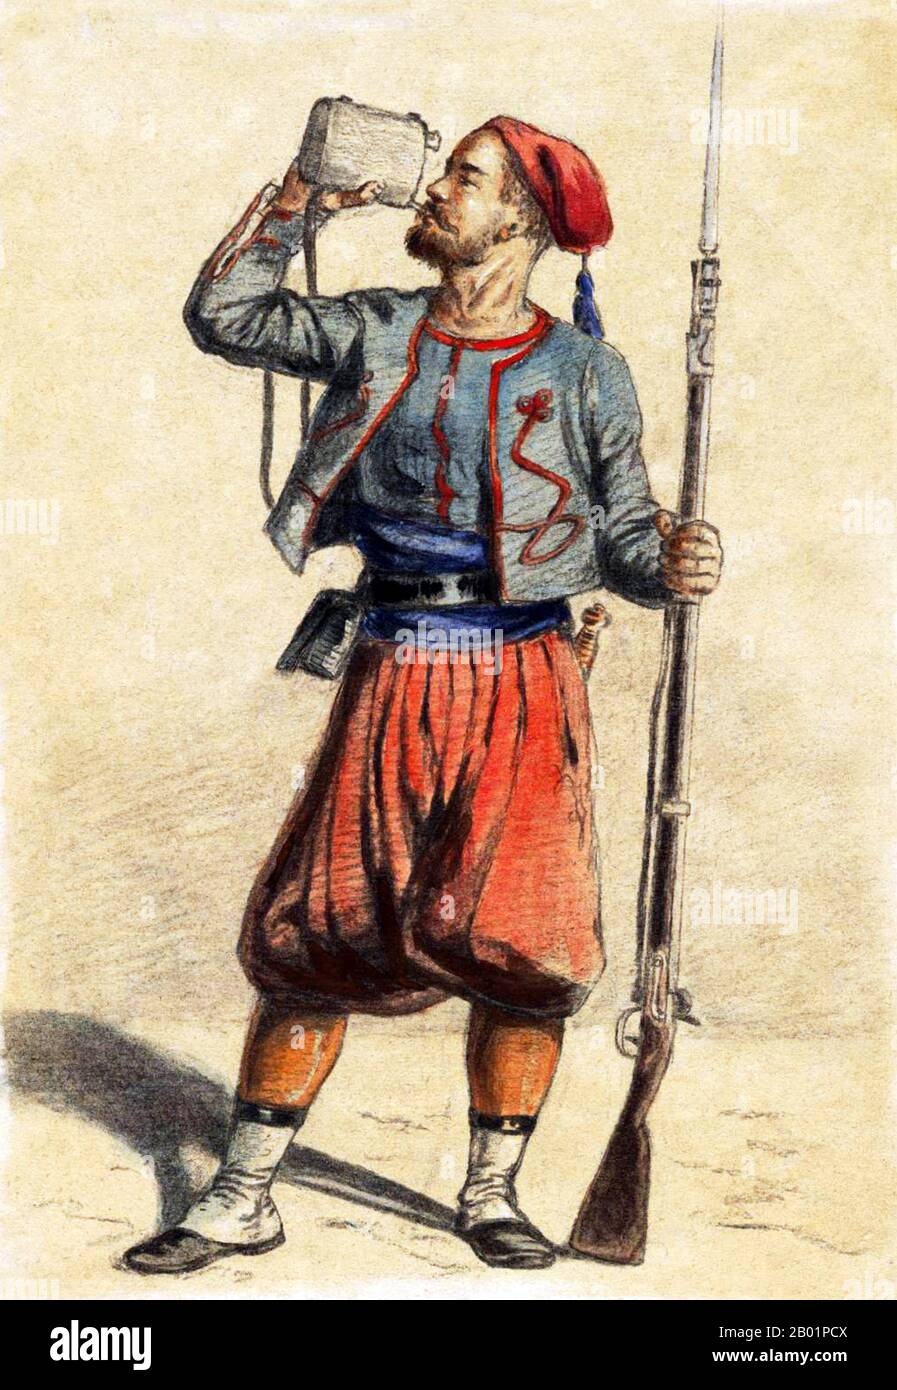 France/Algeria: A French North African Zouave, late 19th century.  Zouave was the title given to certain light infantry regiments in the French Army, normally serving in French North Africa between 1831 and 1962. The name was also adopted during the 19th century by units in other armies, especially volunteer regiments raised for service in the American Civil War. The chief distinguishing characteristics of such units were the zouave uniform, which included short open-fronted jackets, baggy trousers and often sashes and oriental headgear. Stock Photo